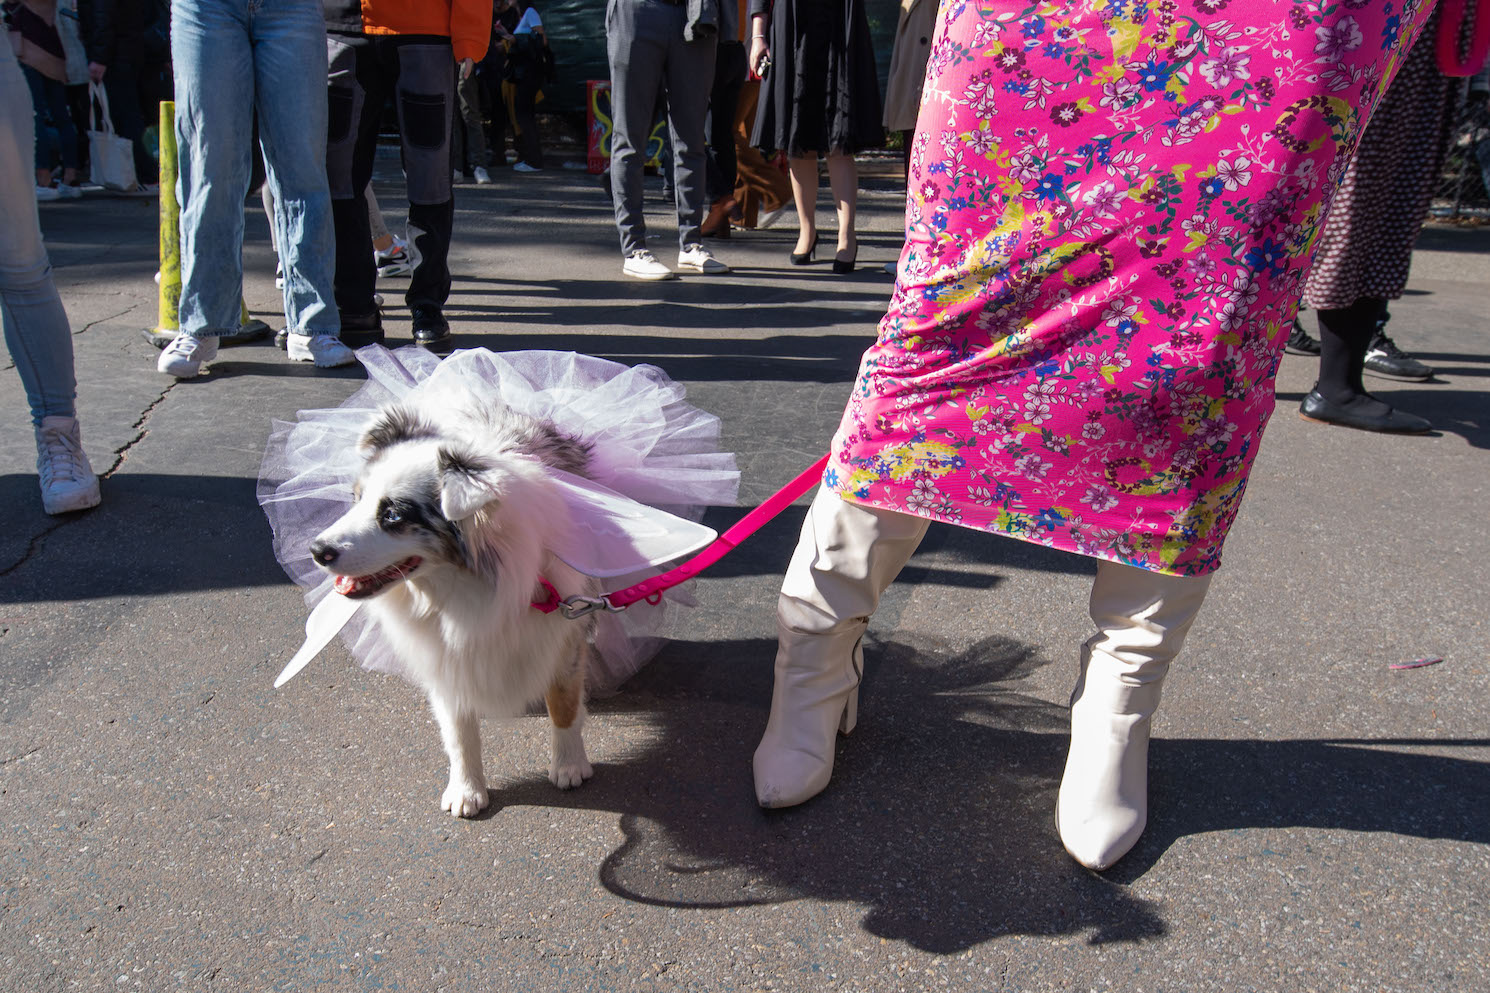 An Australian Shepherd wears a light pink tutu, light pink wings and a bright pink leash. The dog’s owner stands next to the dog, wearing white heeled boots and a long floral pink dress. A crowd of people stand in the background.